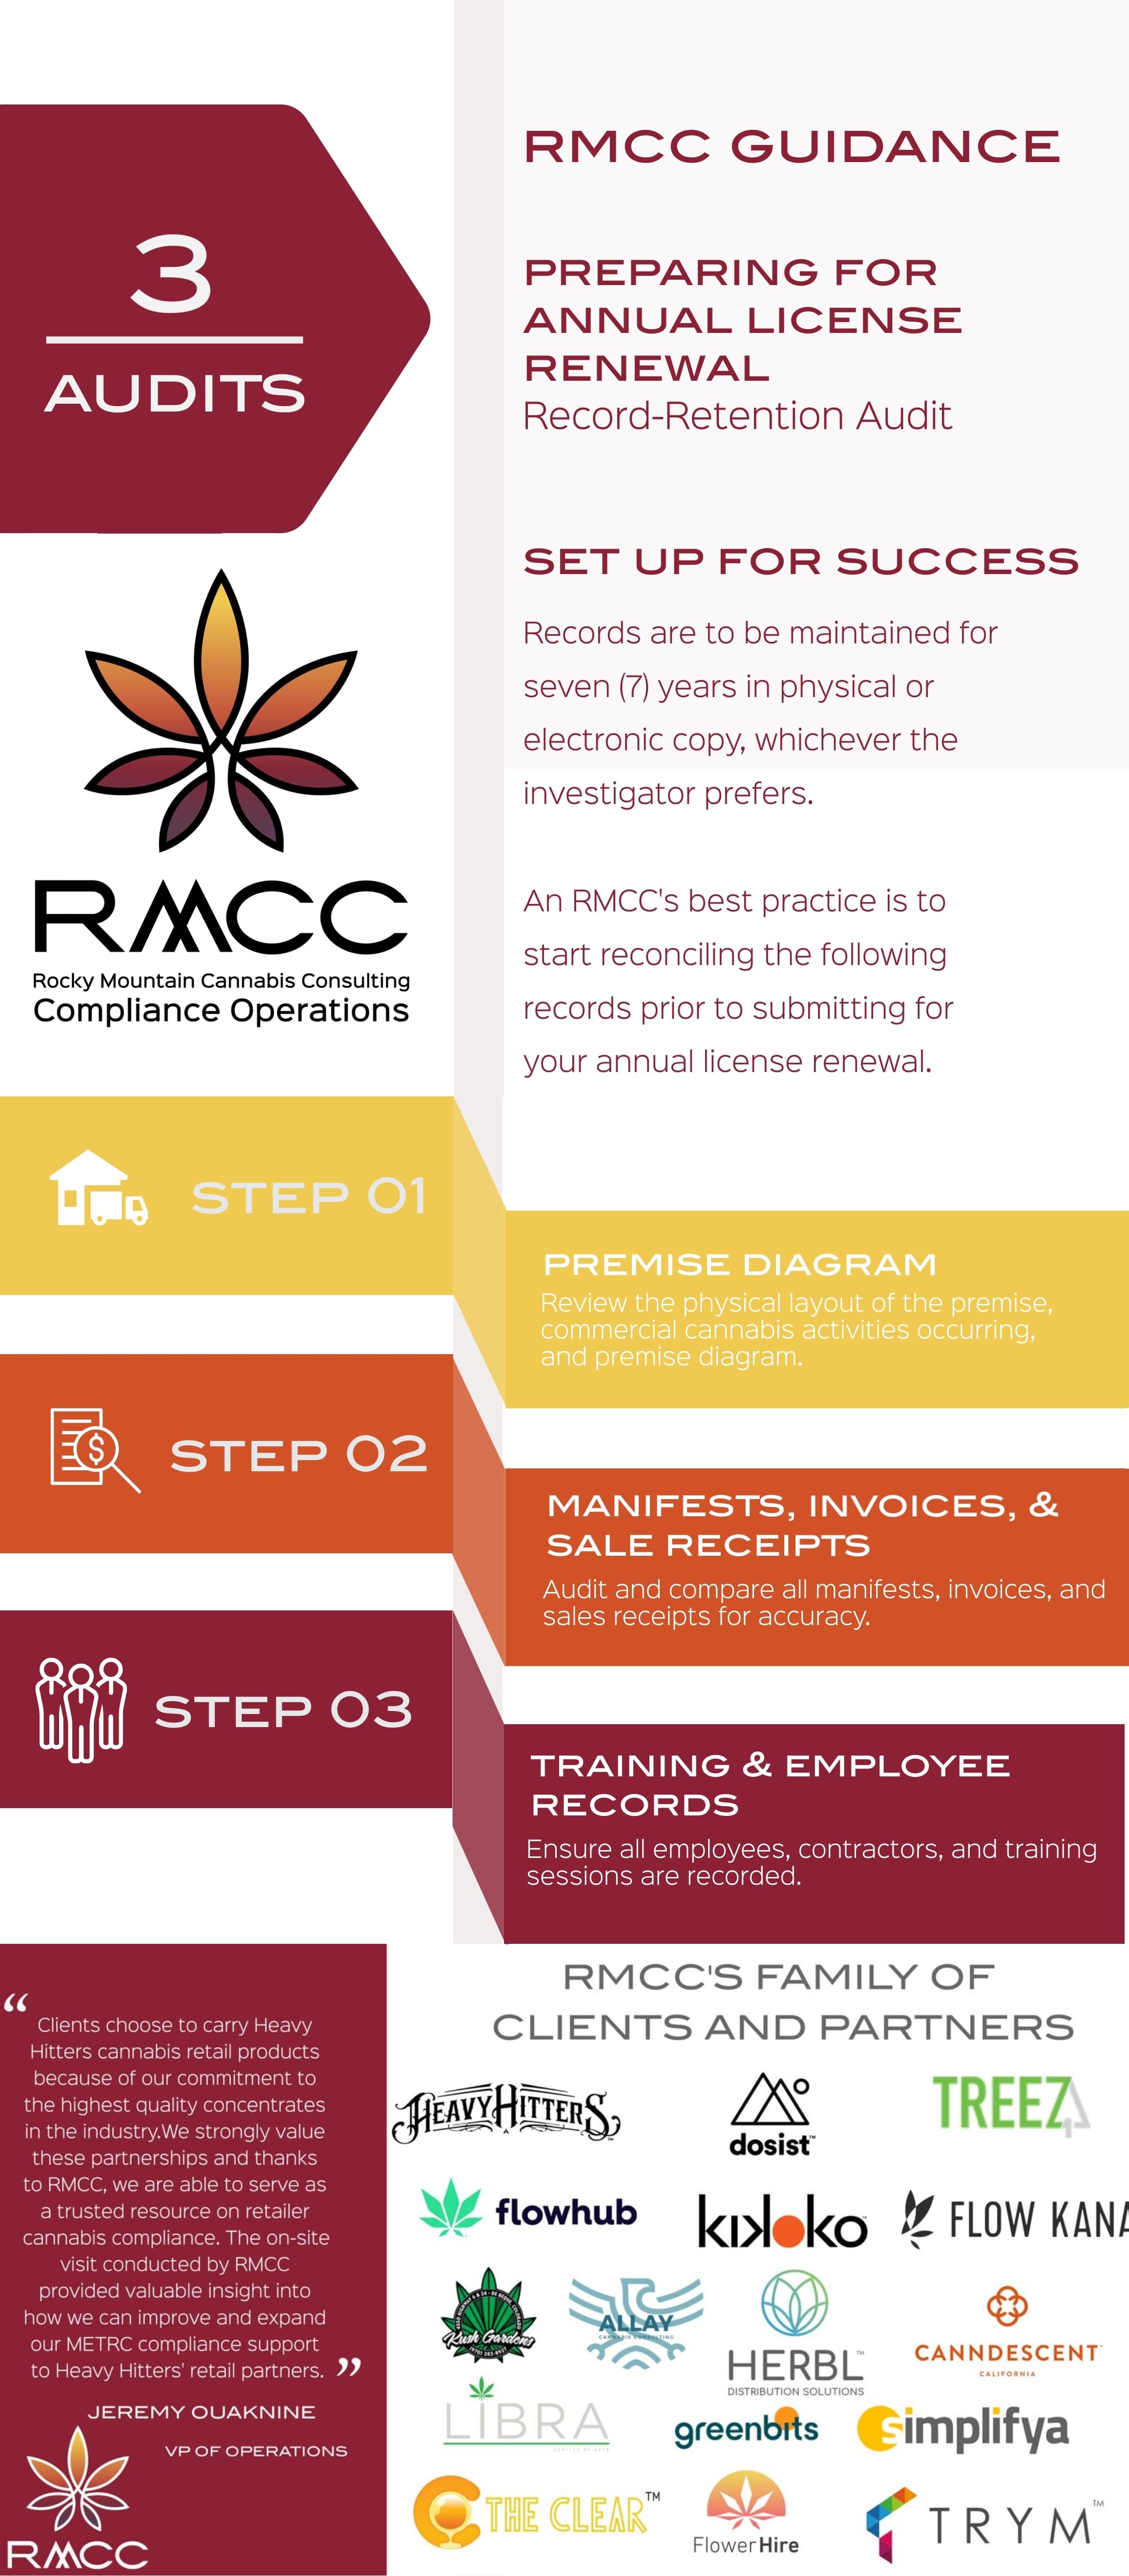 RMCC How to Prepare for Annual License Renewal